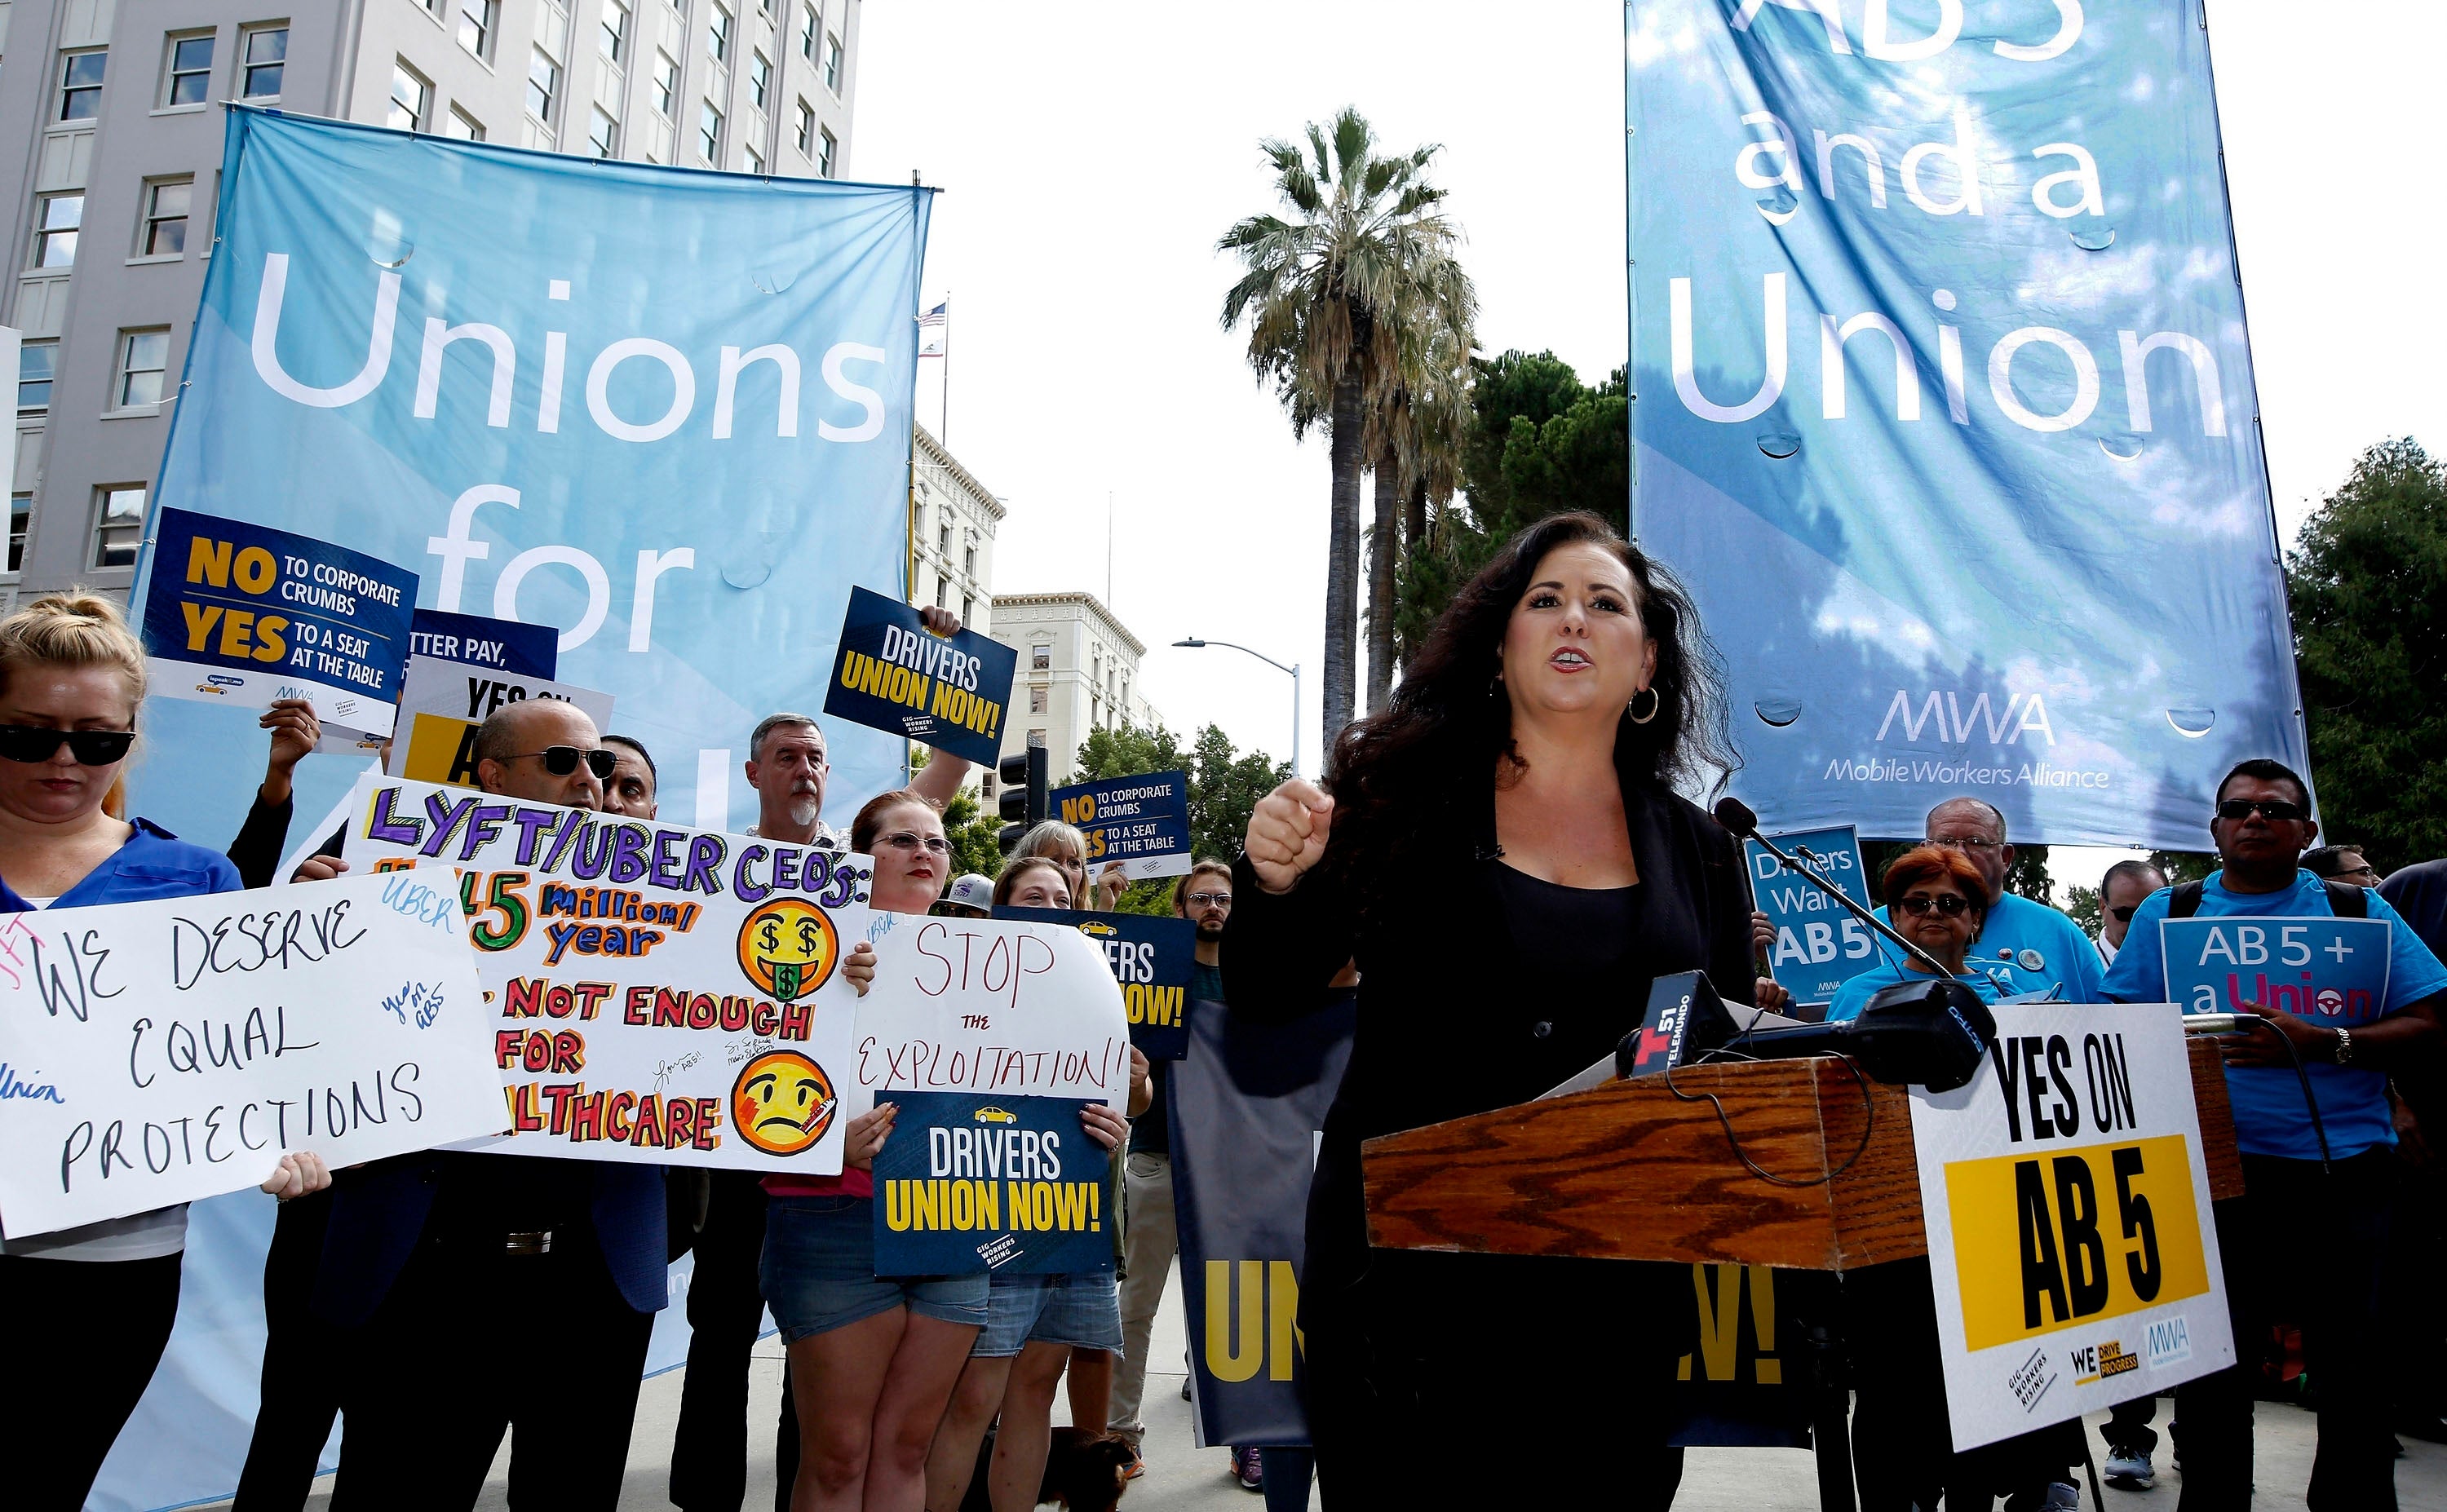 Rally in California calling for the passage of Assembly Bill 5, a law that sought to provide wage and labor protections to gig workers.